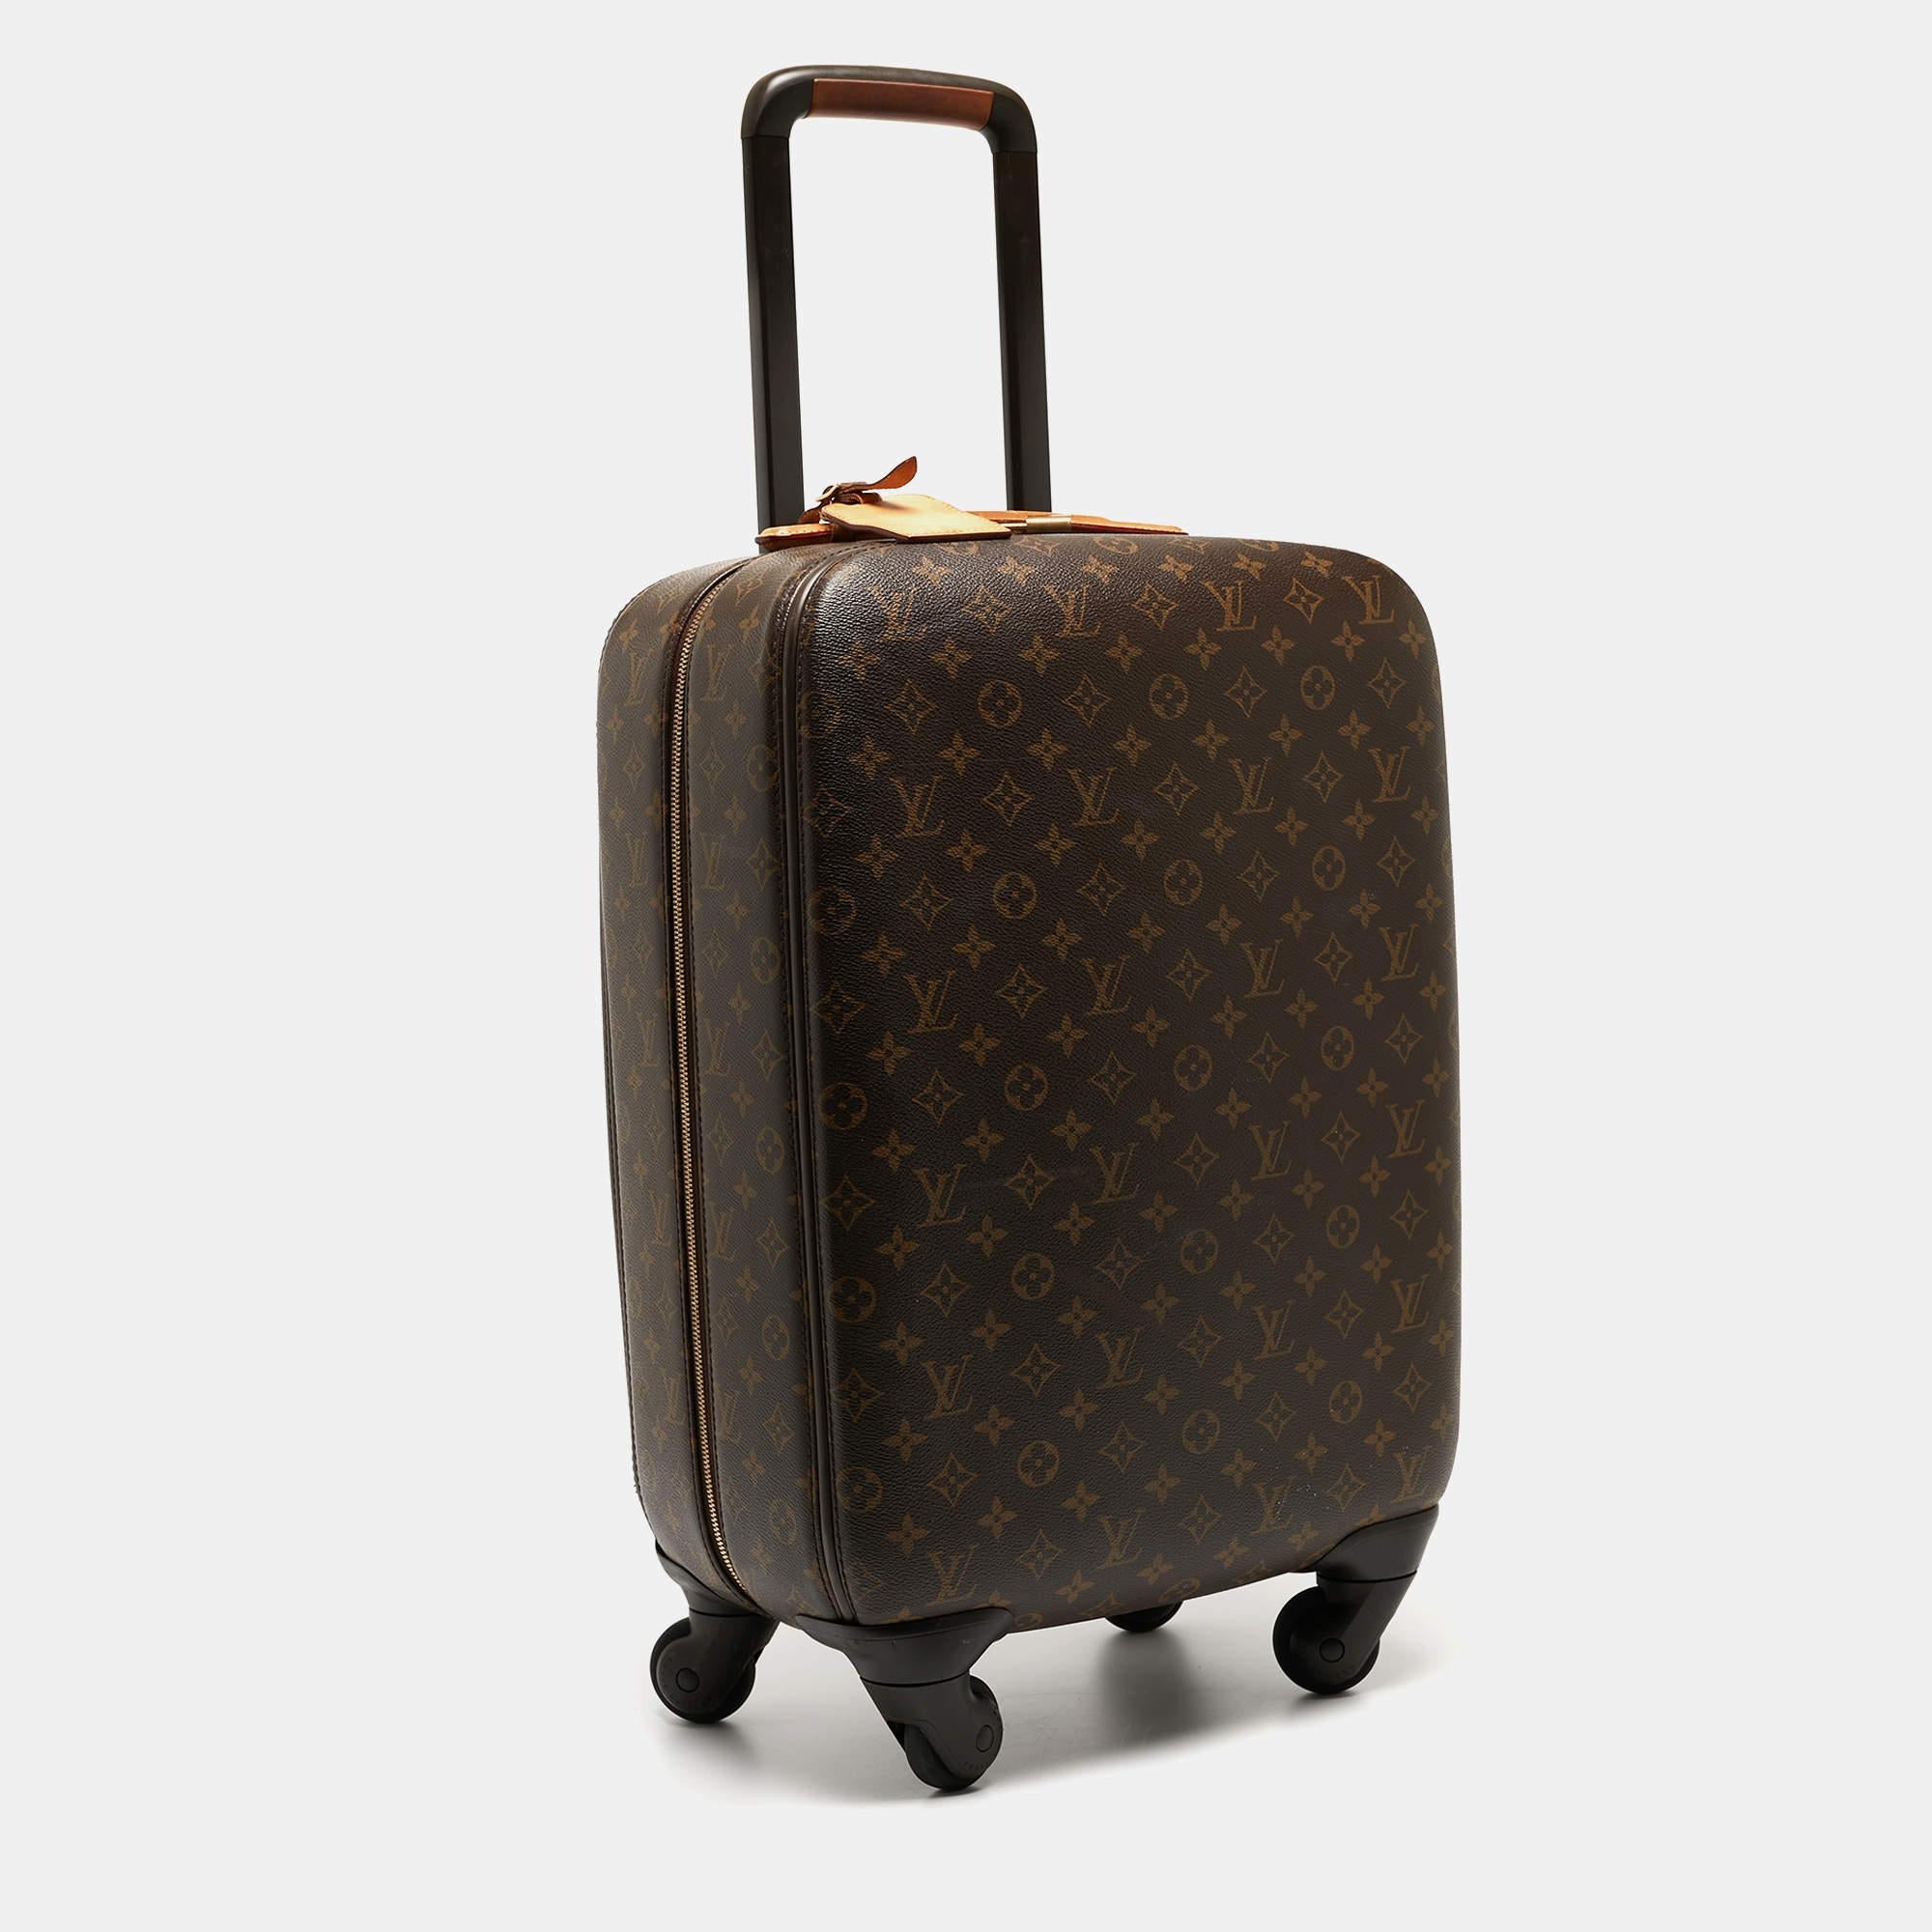 Travel to the places your heart desires with this Louis Vuitton luggage case. It is made of high-grade materials in a spacious size. Robust and ultra-mobile, it glides along smoothly on its wheels, while its ingeniously arranged interior boasts many